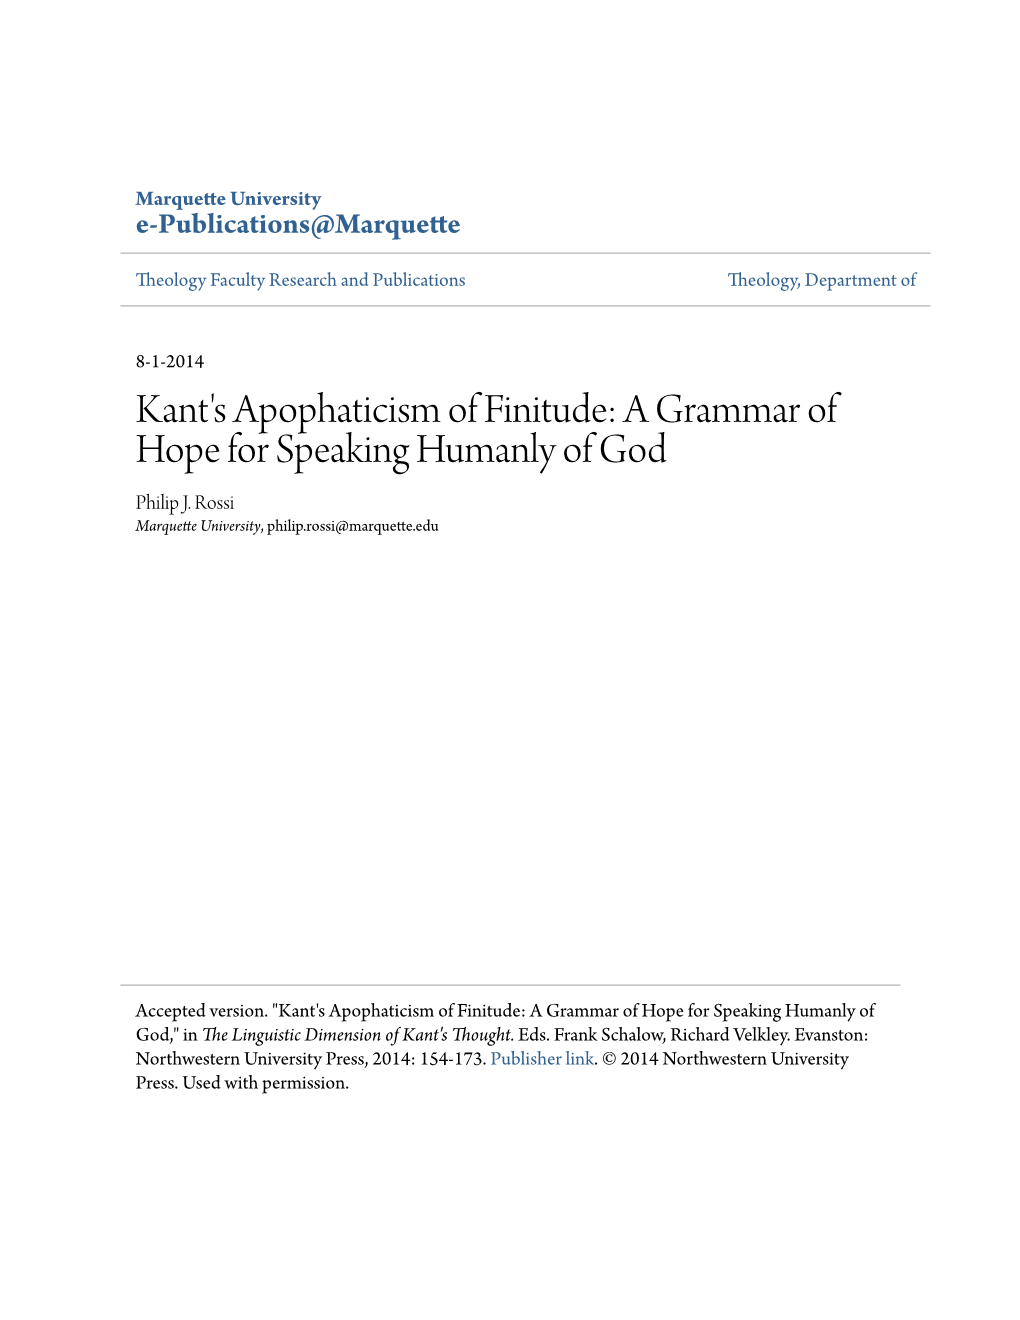 Kant's Apophaticism of Finitude: a Grammar of Hope for Speaking Humanly of God Philip J